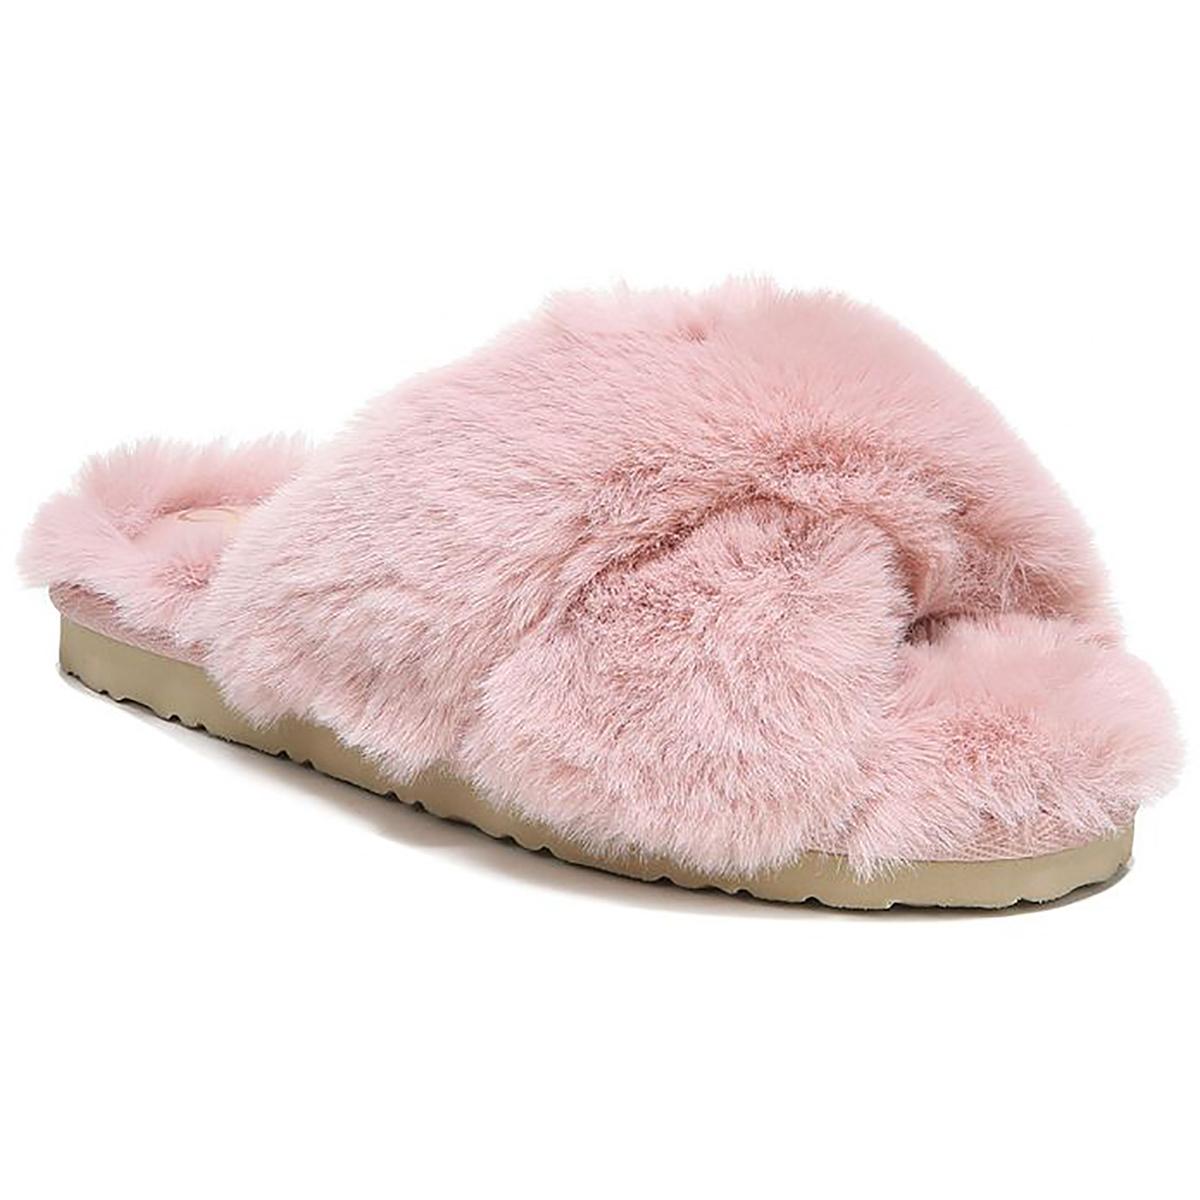 Selected Color is Rose Faux Fur